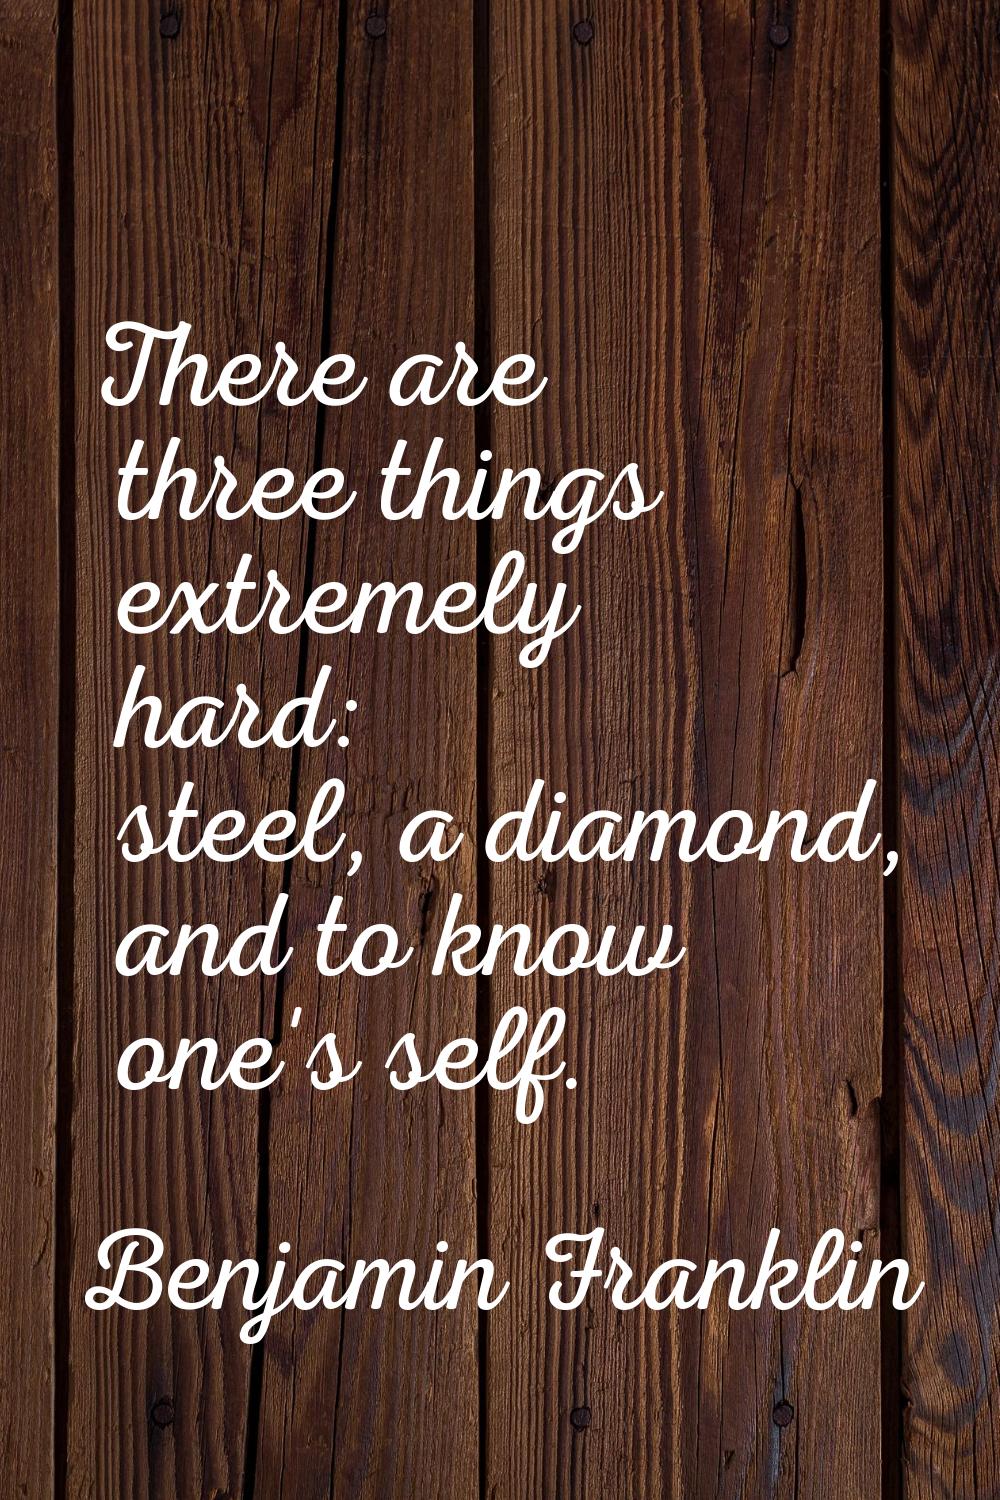 There are three things extremely hard: steel, a diamond, and to know one's self.